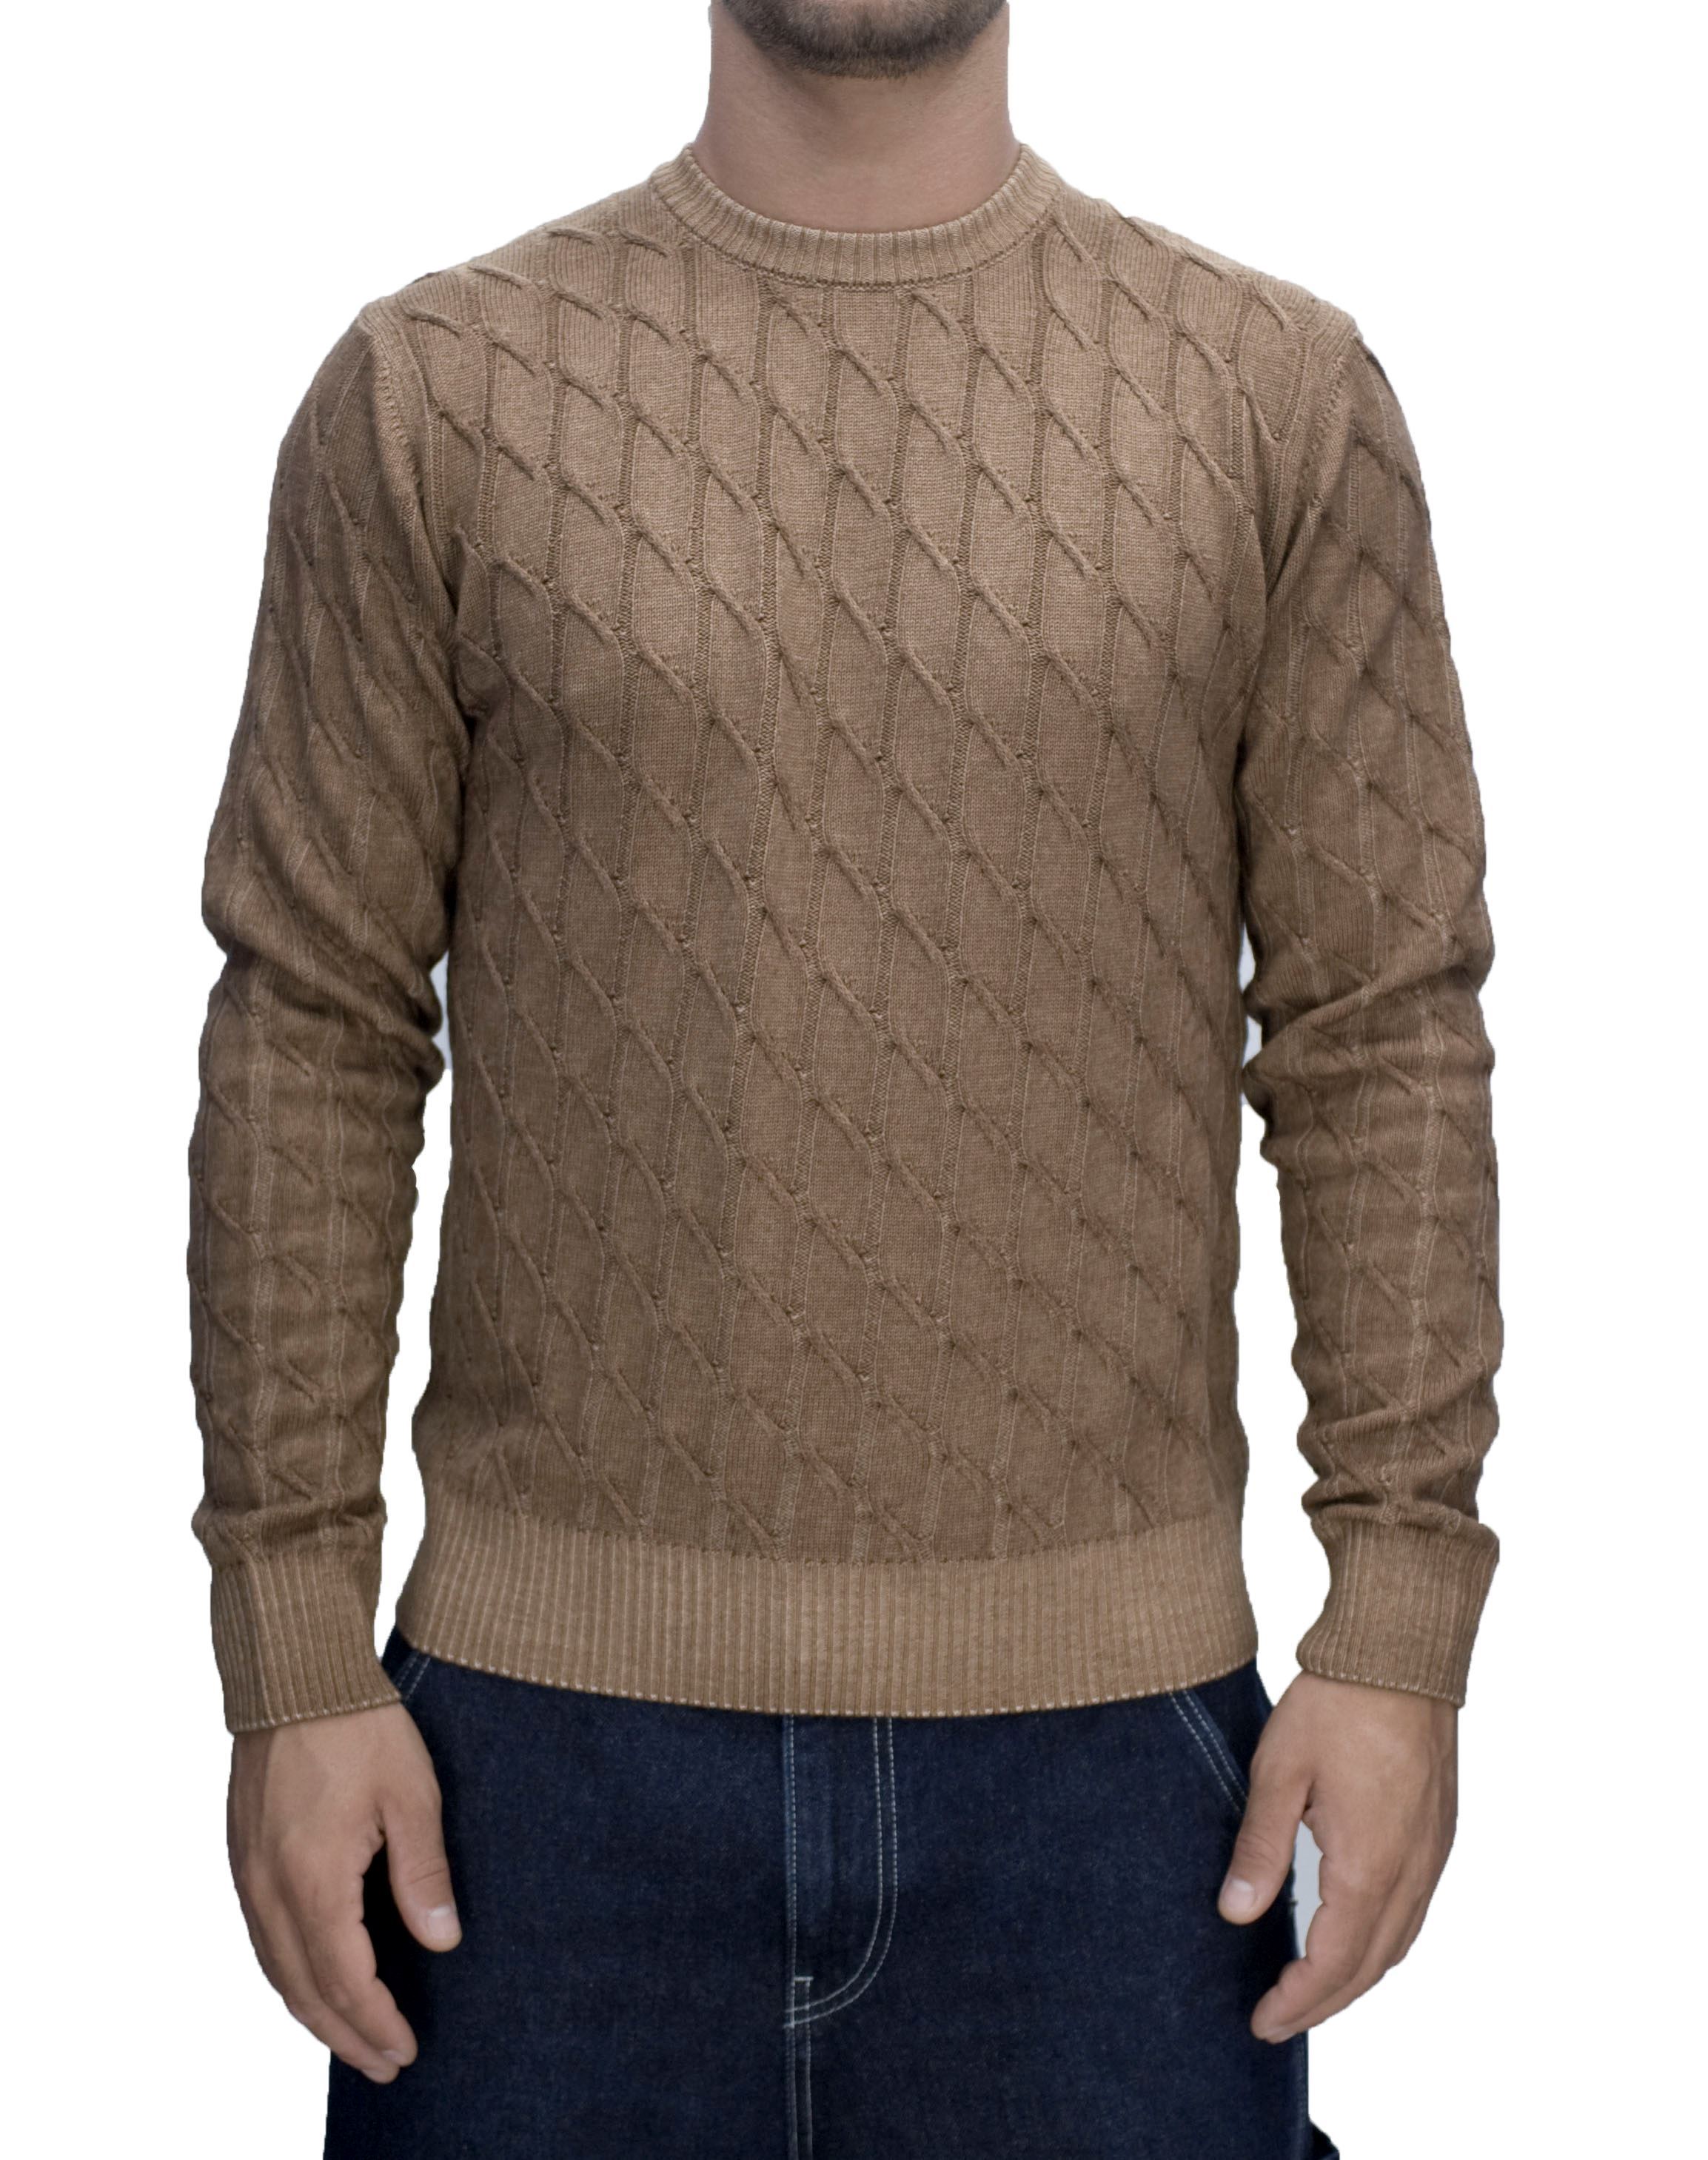 Picture of Tobacco-colored cable-knit crewneck sweater